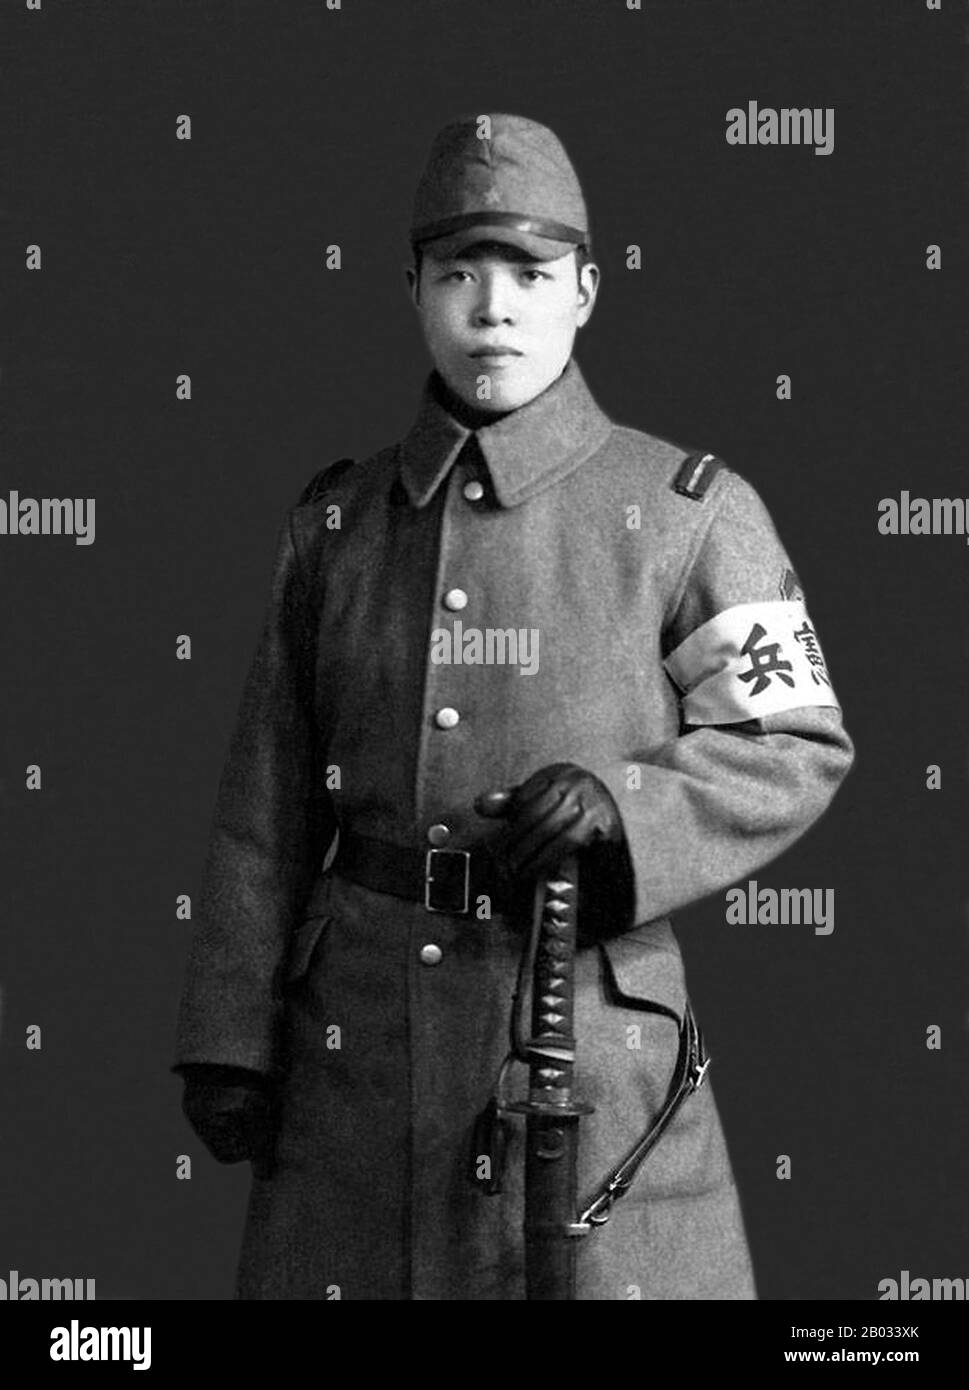 The Kempeitai ('Military Police Corps') was the military police arm of the Imperial Japanese Army from 1881 to 1945. It was not a conventional military police, but more of a secret police, akin to Nazi Germany's Gestapo.  While it was institutionally part of the Imperial Japanese Army, it also discharged the functions of the military police for the Imperial Japanese Navy under the direction of the Admiralty Minister (although the IJN had its own much smaller Tokkeitai), those of the executive police under the direction of the Interior Minister, and those of the judicial police under the direct Stock Photo